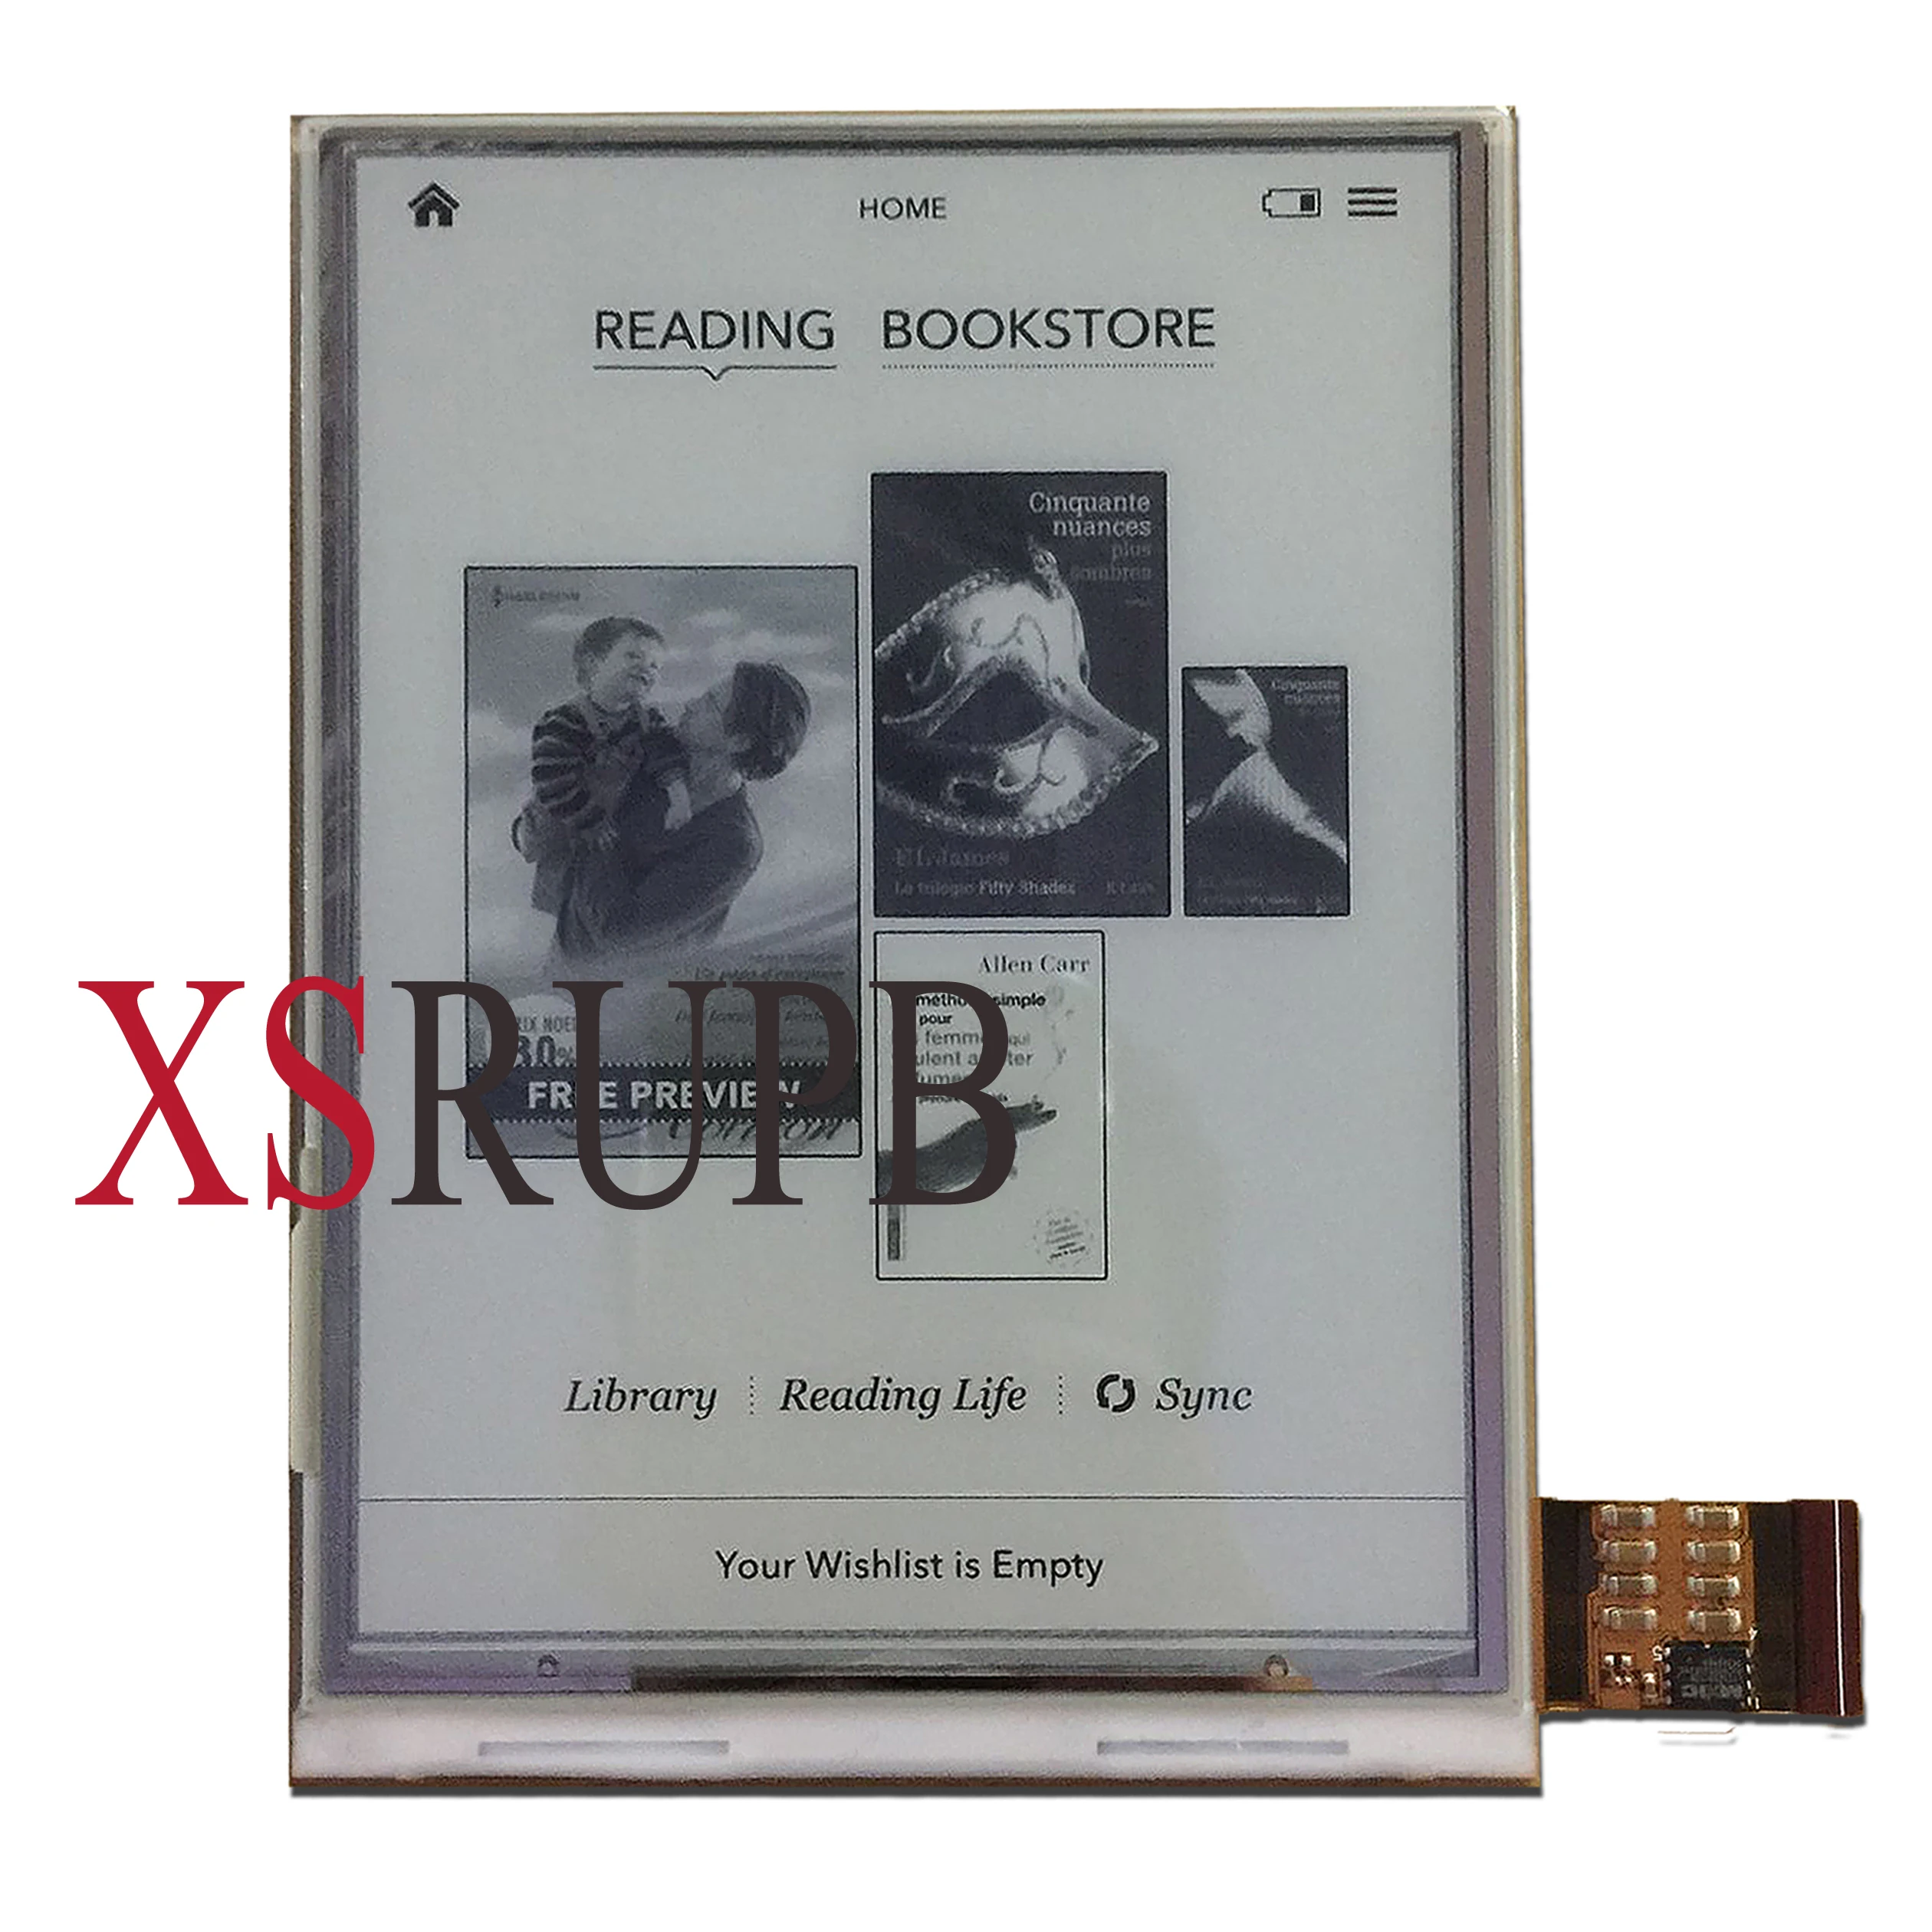 6" 1024*758 lcd For Digma s675 ONYX E-book Ebook Reader LCD Display Replacement